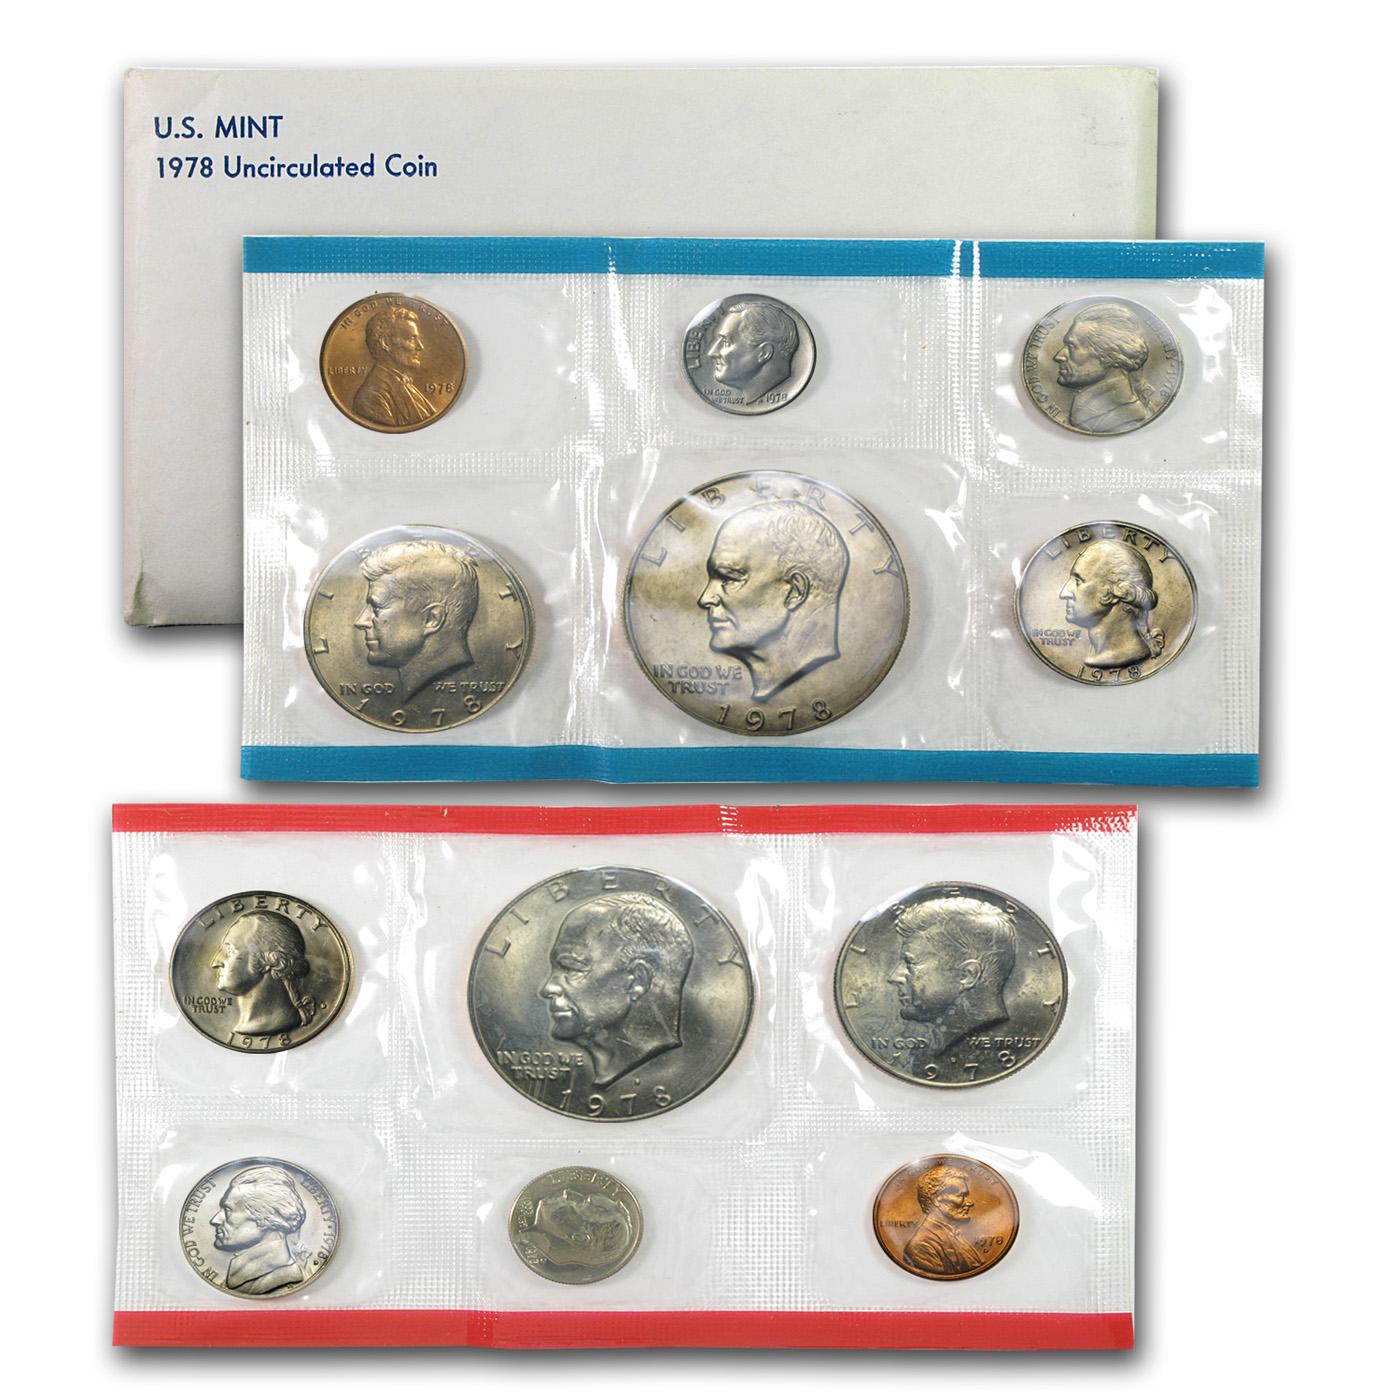 1978 United States Mint Set in Original Government Packaging  includes 2 Eisenhower Dollars